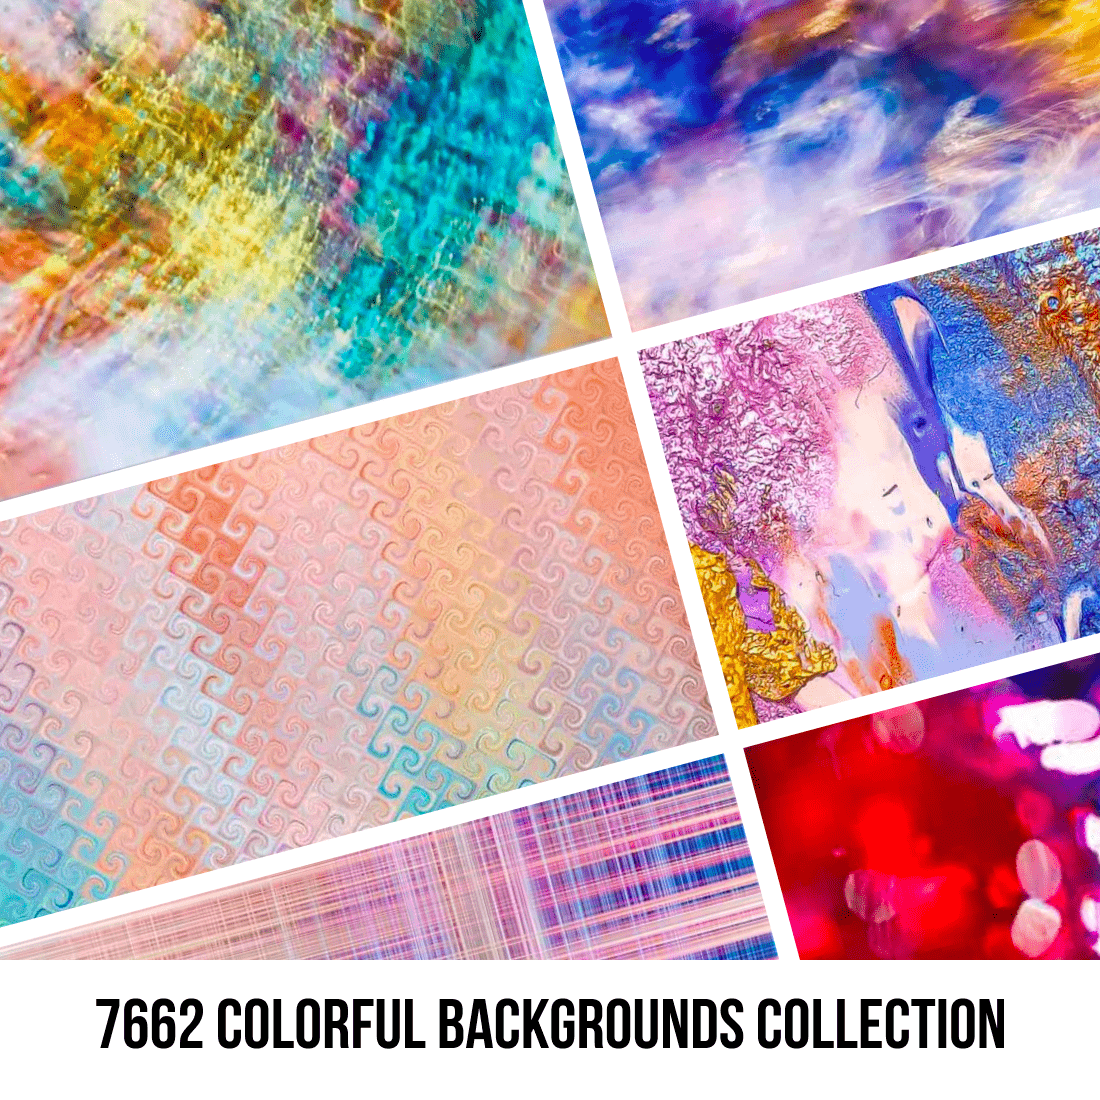 47.1 - 7662 Colorful Backgrounds Collection